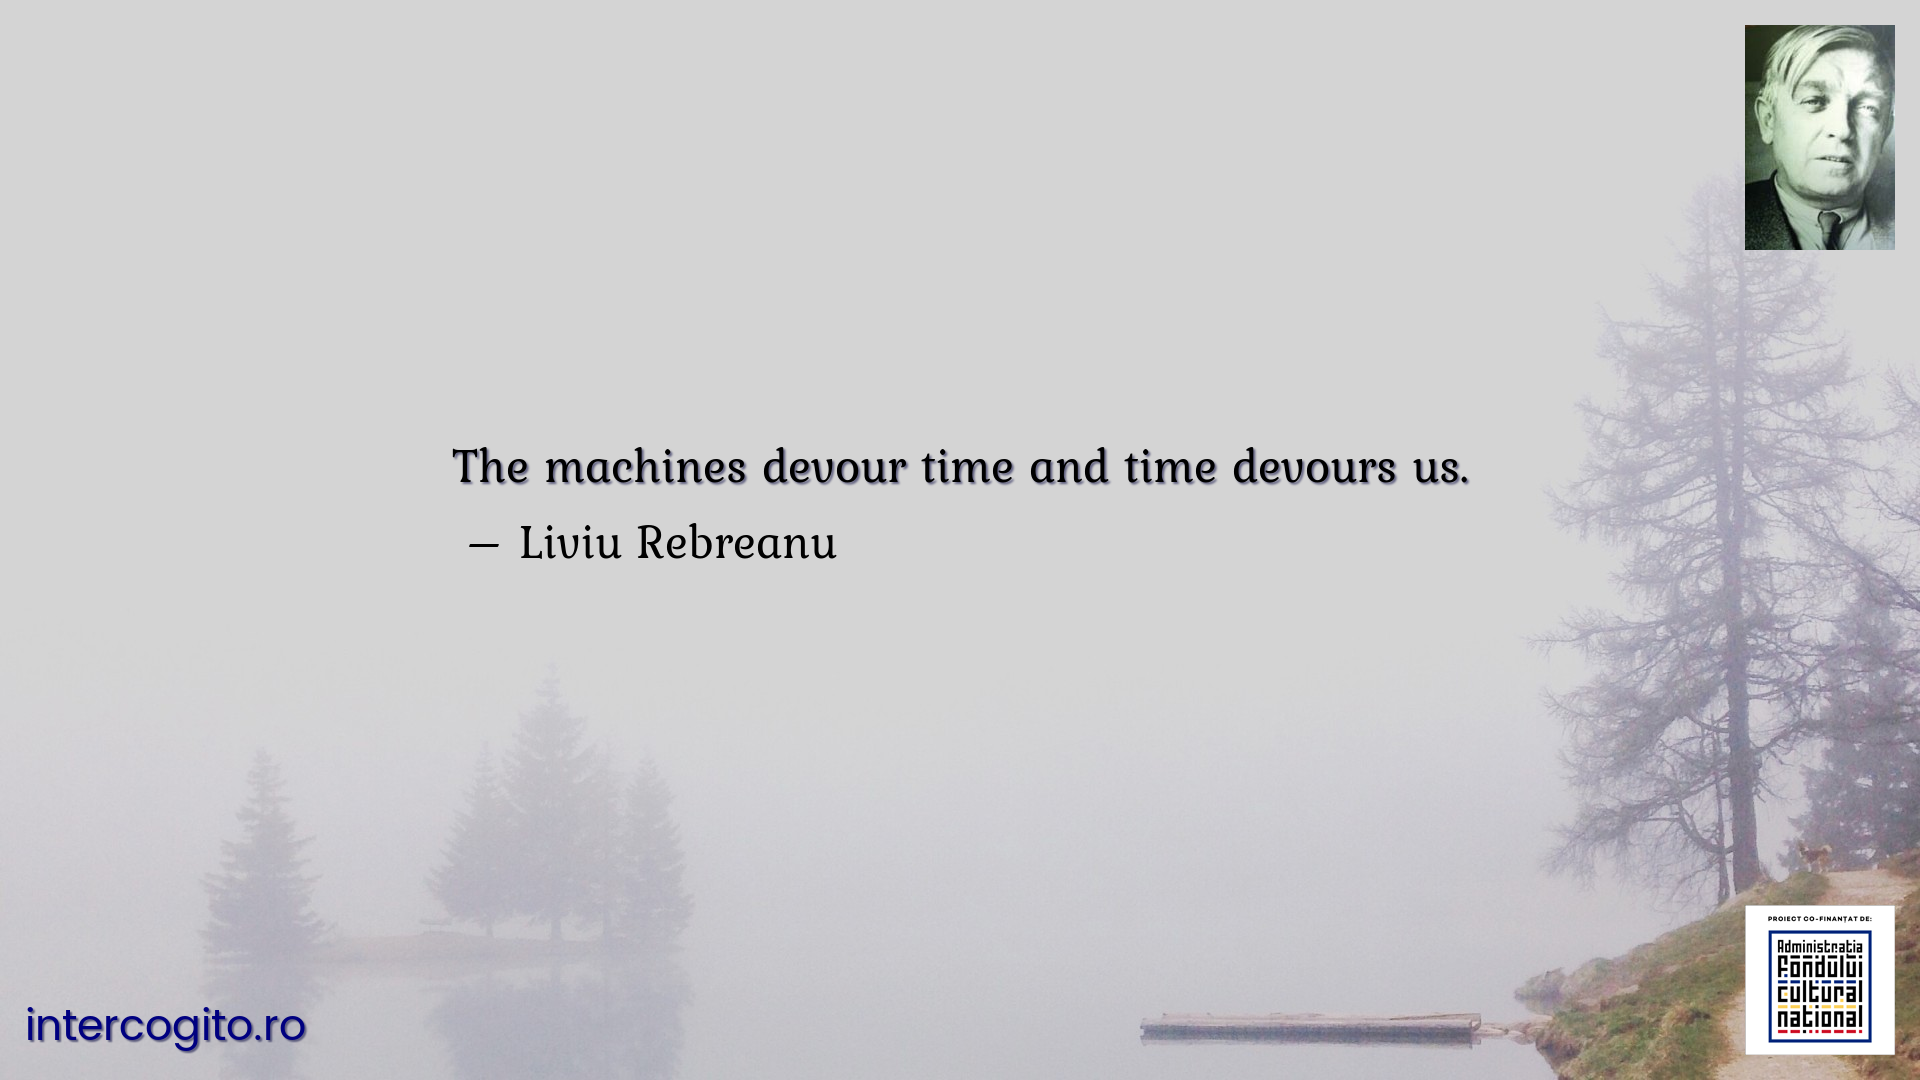 The machines devour time and time devours us.